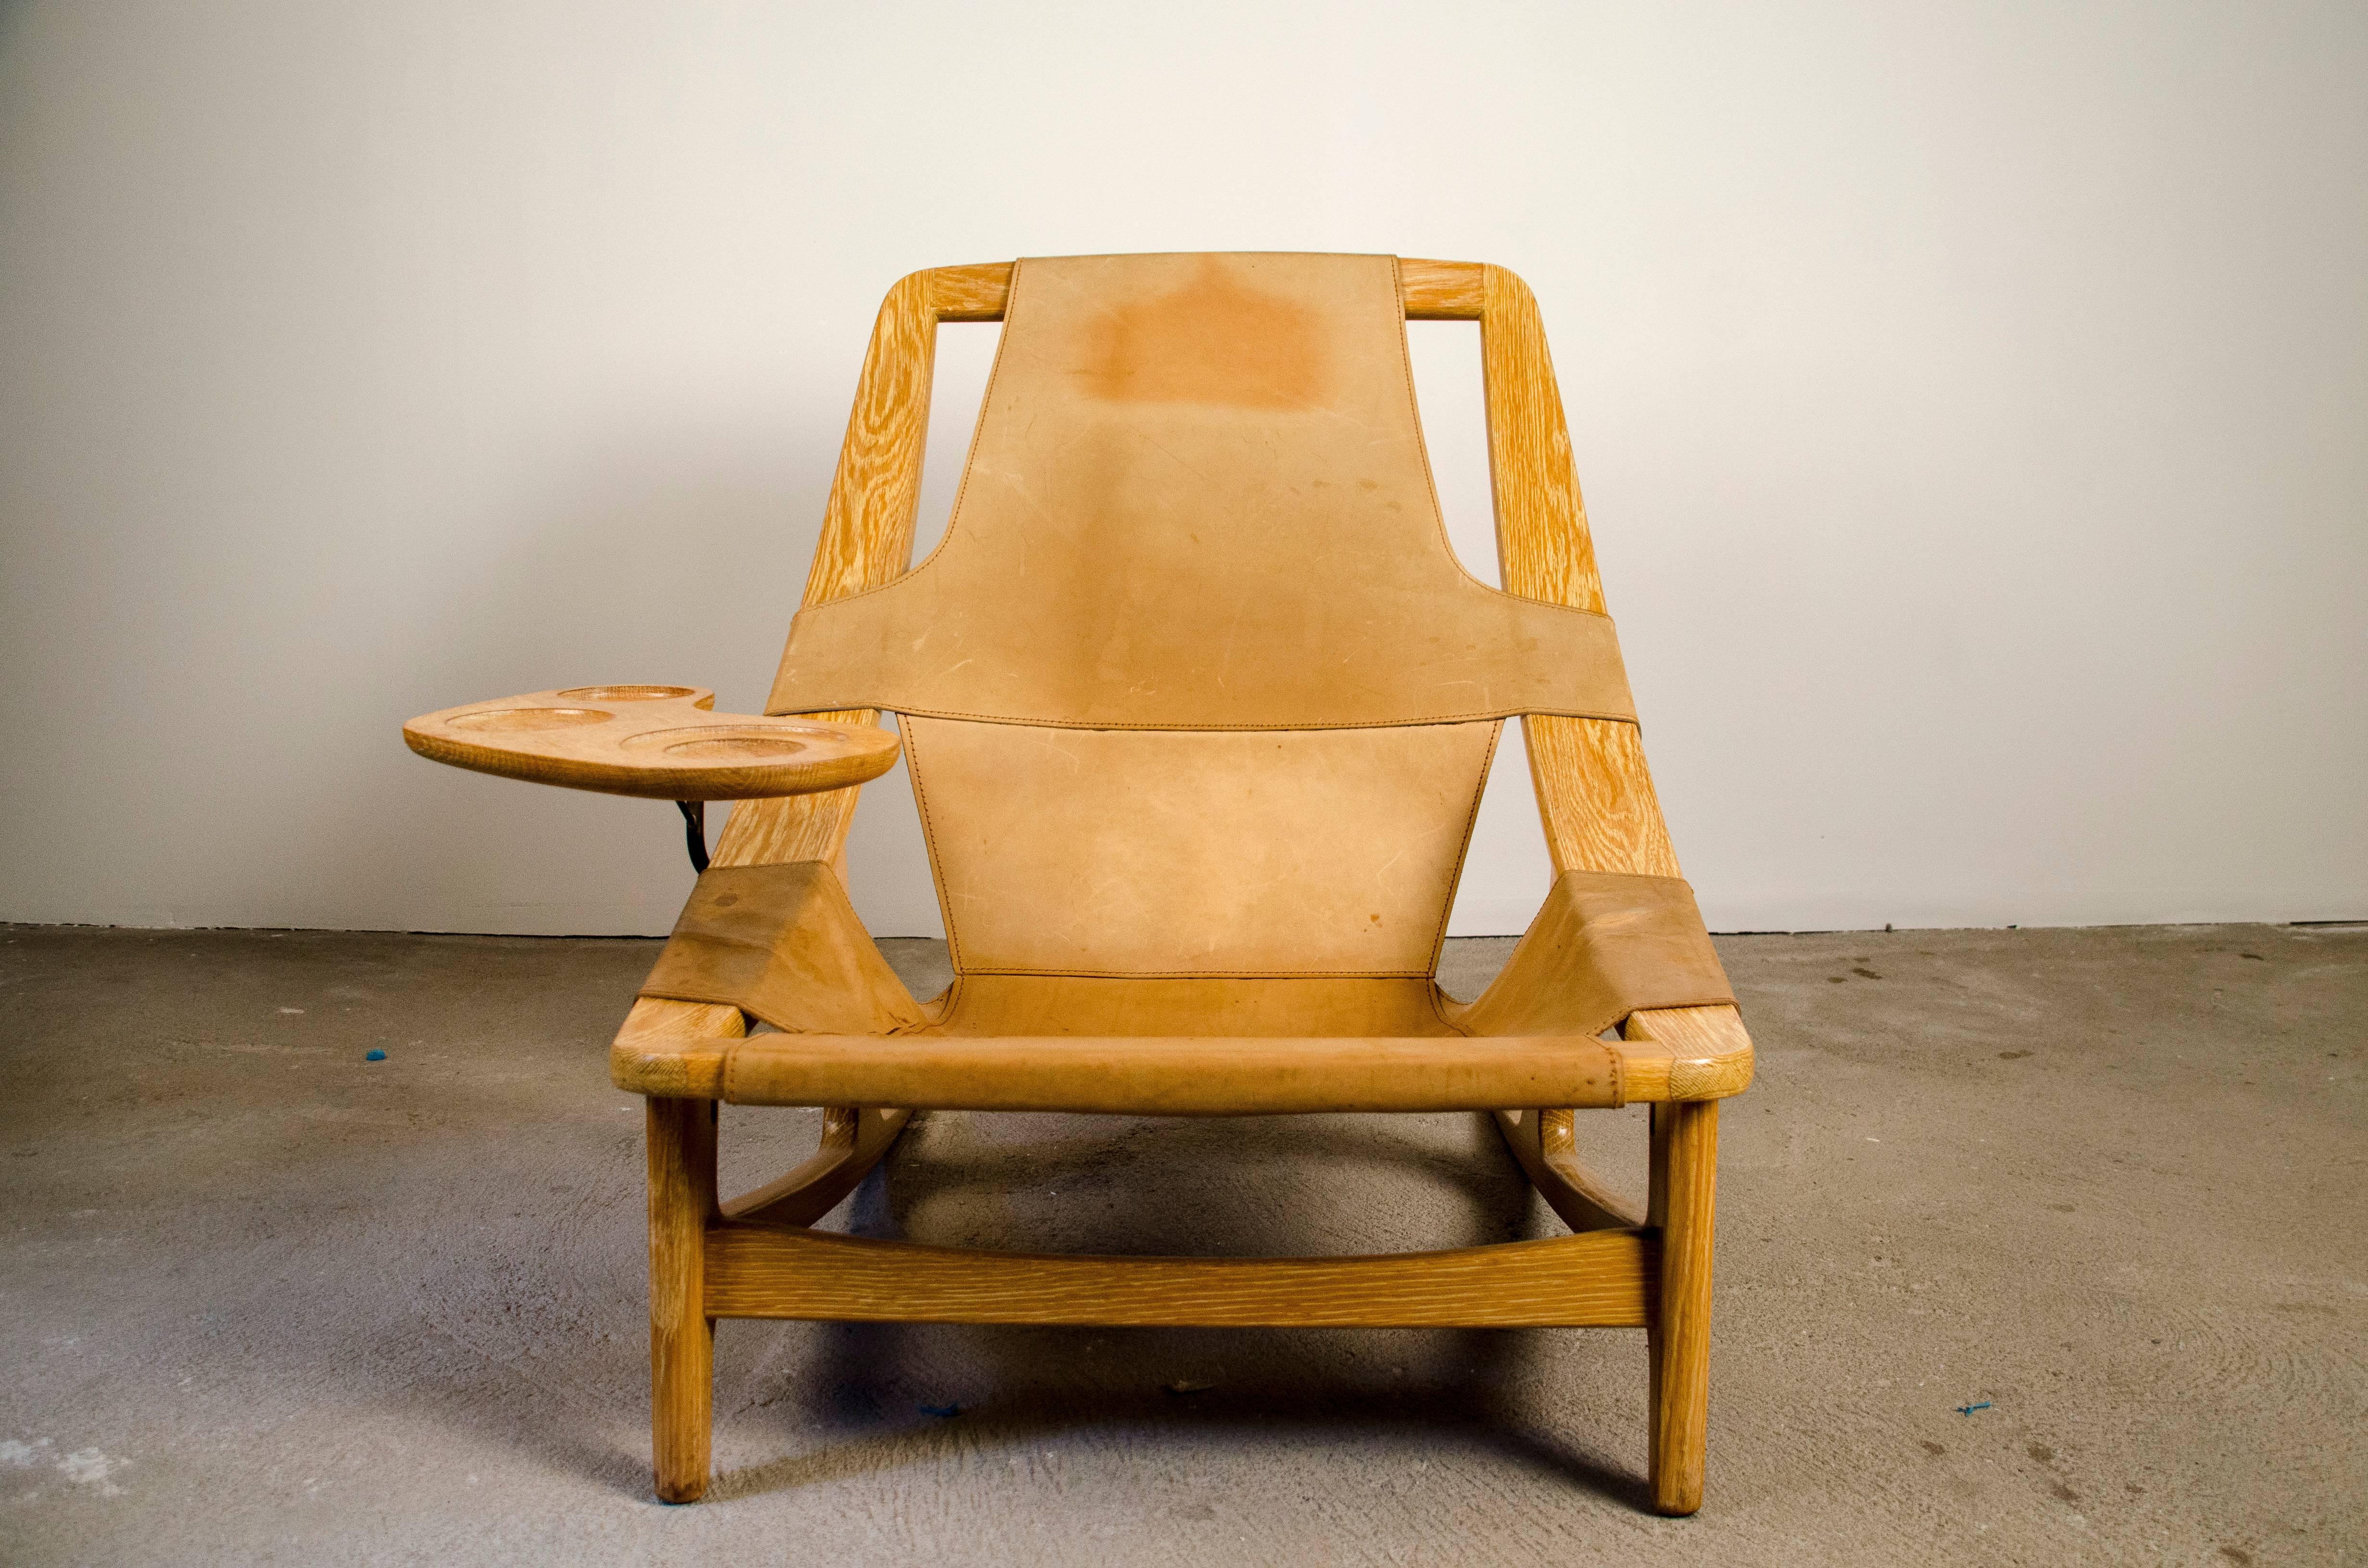 Rare Arne Tidemand Ruud Holmenkollen chair with tablet midcentury leather oak

Rare model manufactured by Norcraft in limed oak with Cognac colored leather. Original cushion and available set of new cushion with head rest in sheepskin and wool by